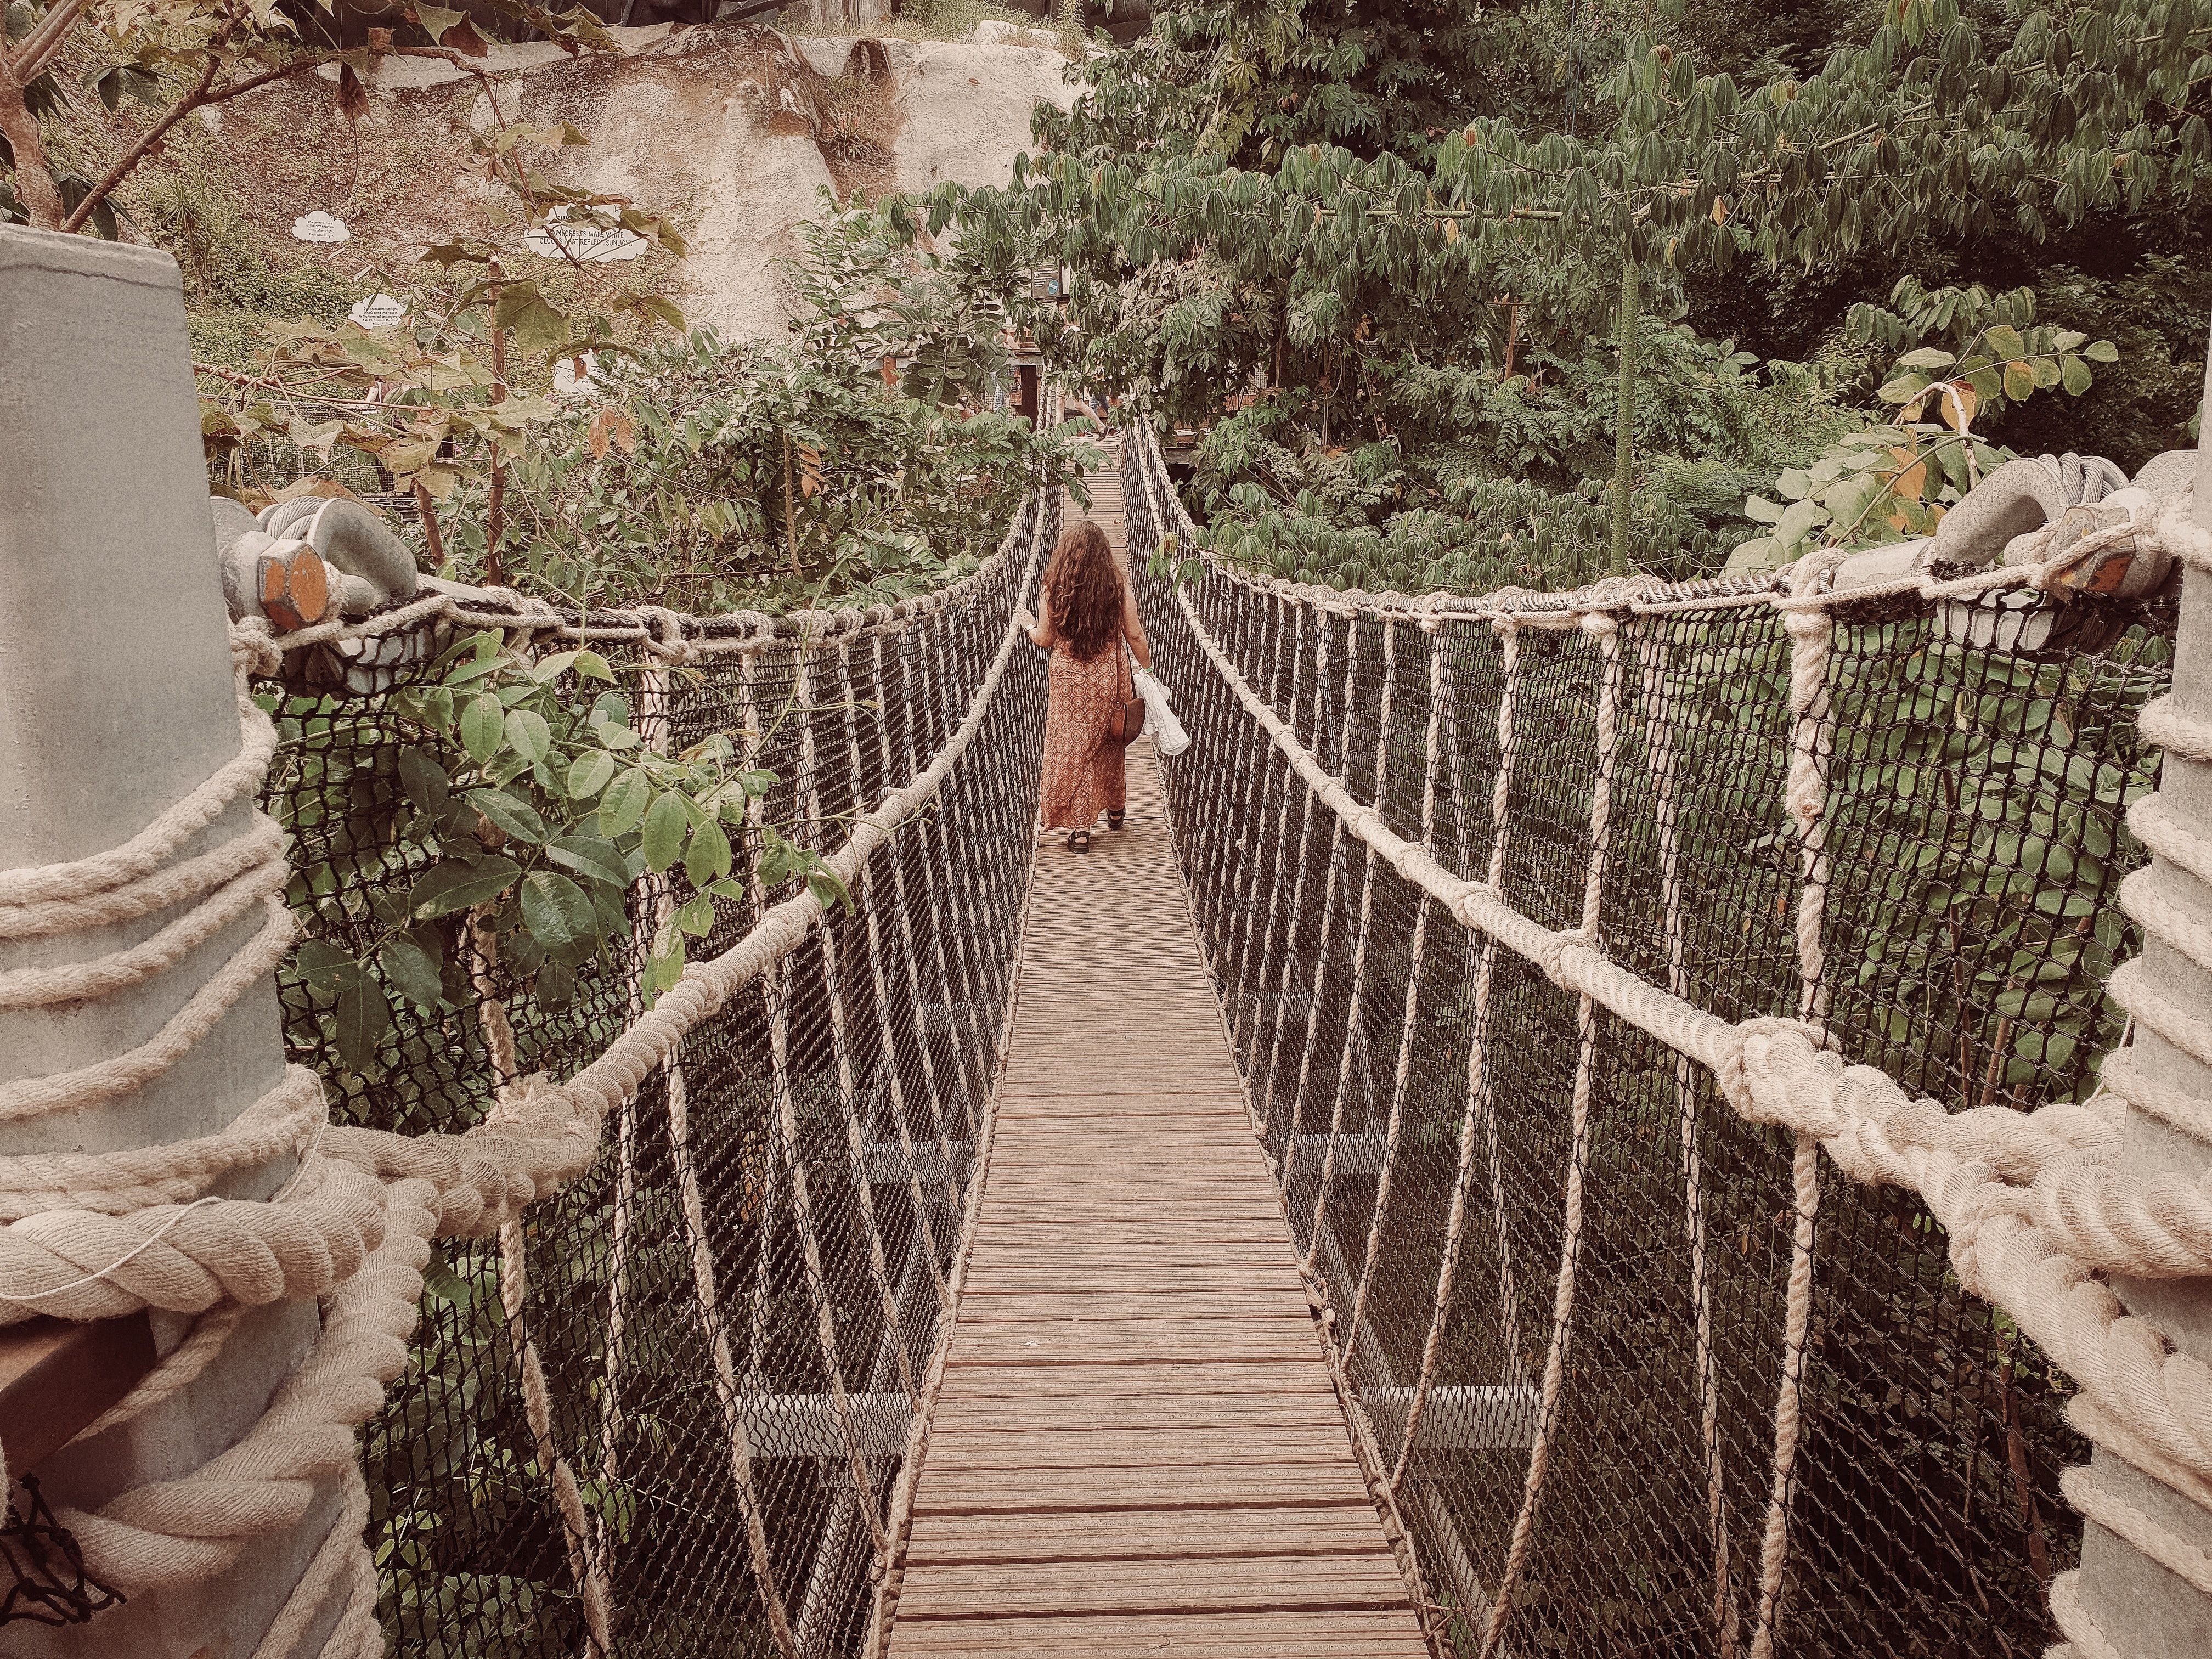 A suspension bridge connects sections of the Eden Project.